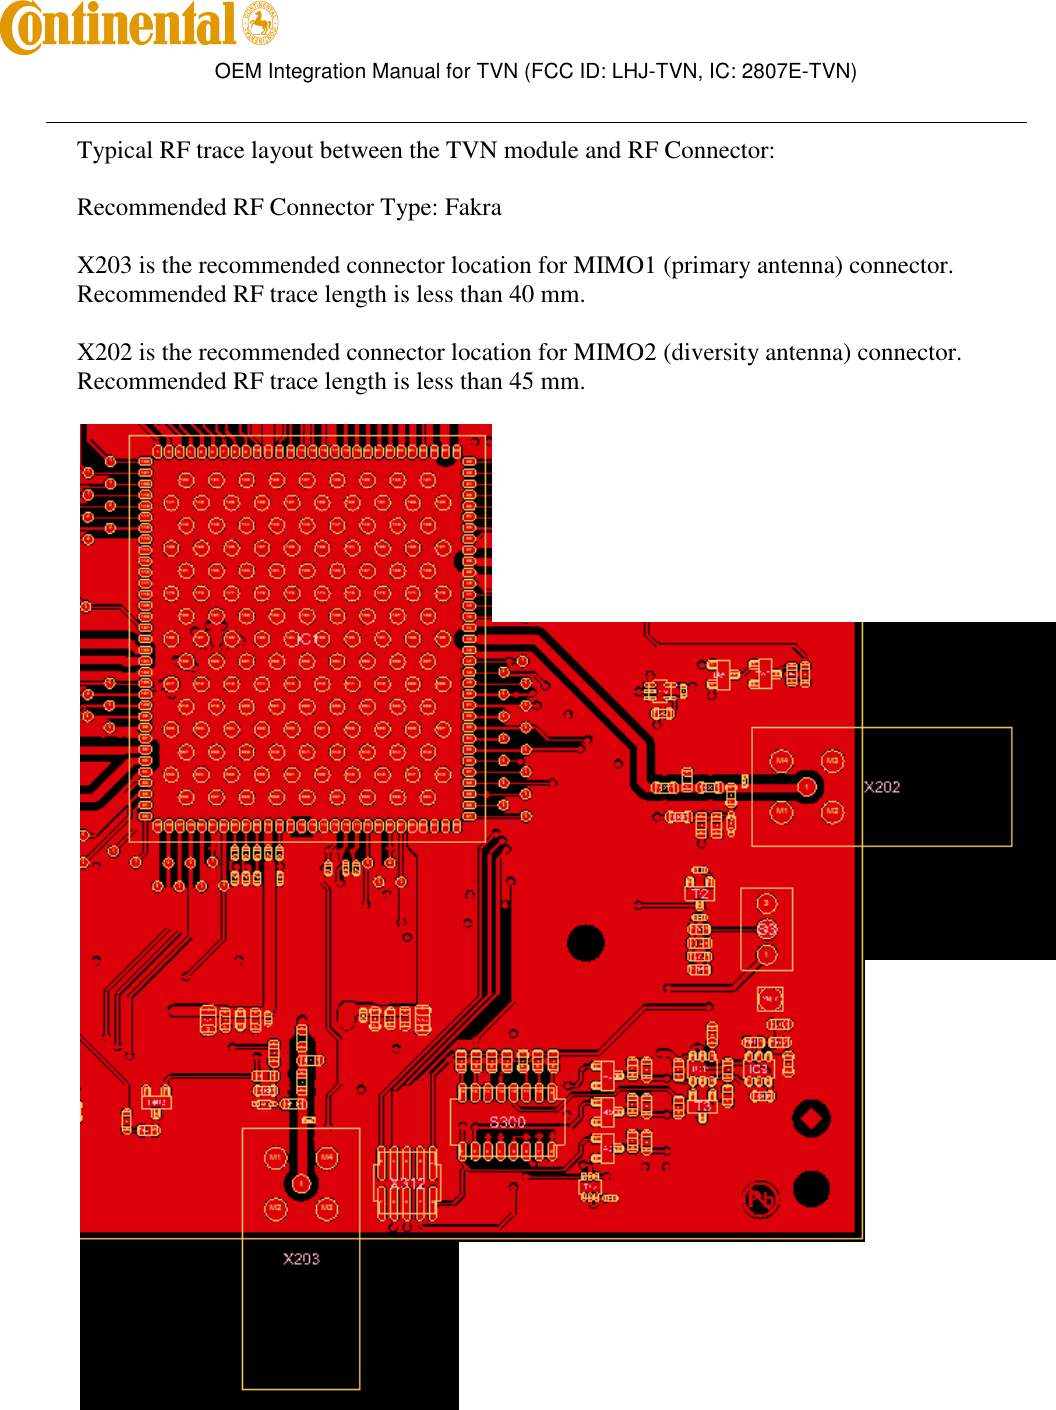        OEM Integration Manual for TVN (FCC ID: LHJ-TVN, IC: 2807E-TVN)   Typical RF trace layout between the TVN module and RF Connector: Recommended RF Connector Type: Fakra X203 is the recommended connector location for MIMO1 (primary antenna) connector.  Recommended RF trace length is less than 40 mm. X202 is the recommended connector location for MIMO2 (diversity antenna) connector. Recommended RF trace length is less than 45 mm.  